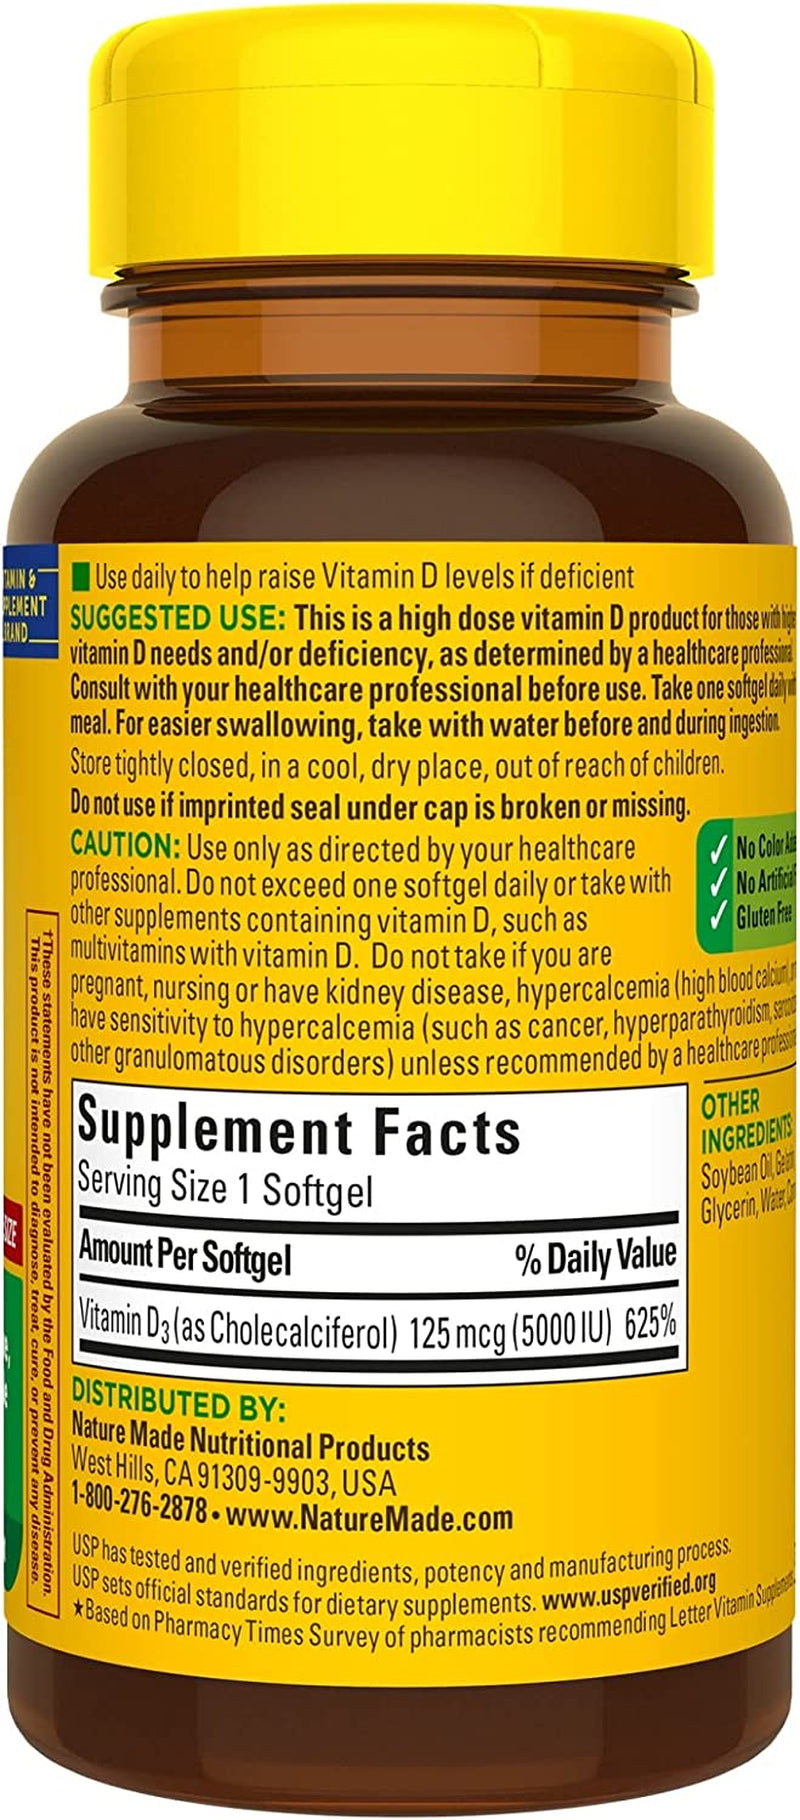 Extra Strength Vitamin D3 5000 IU (125 Mcg), Dietary Supplement for Bone, Teeth, Muscle and Immune Health Support, 180 Softgels, 180 Day Supply